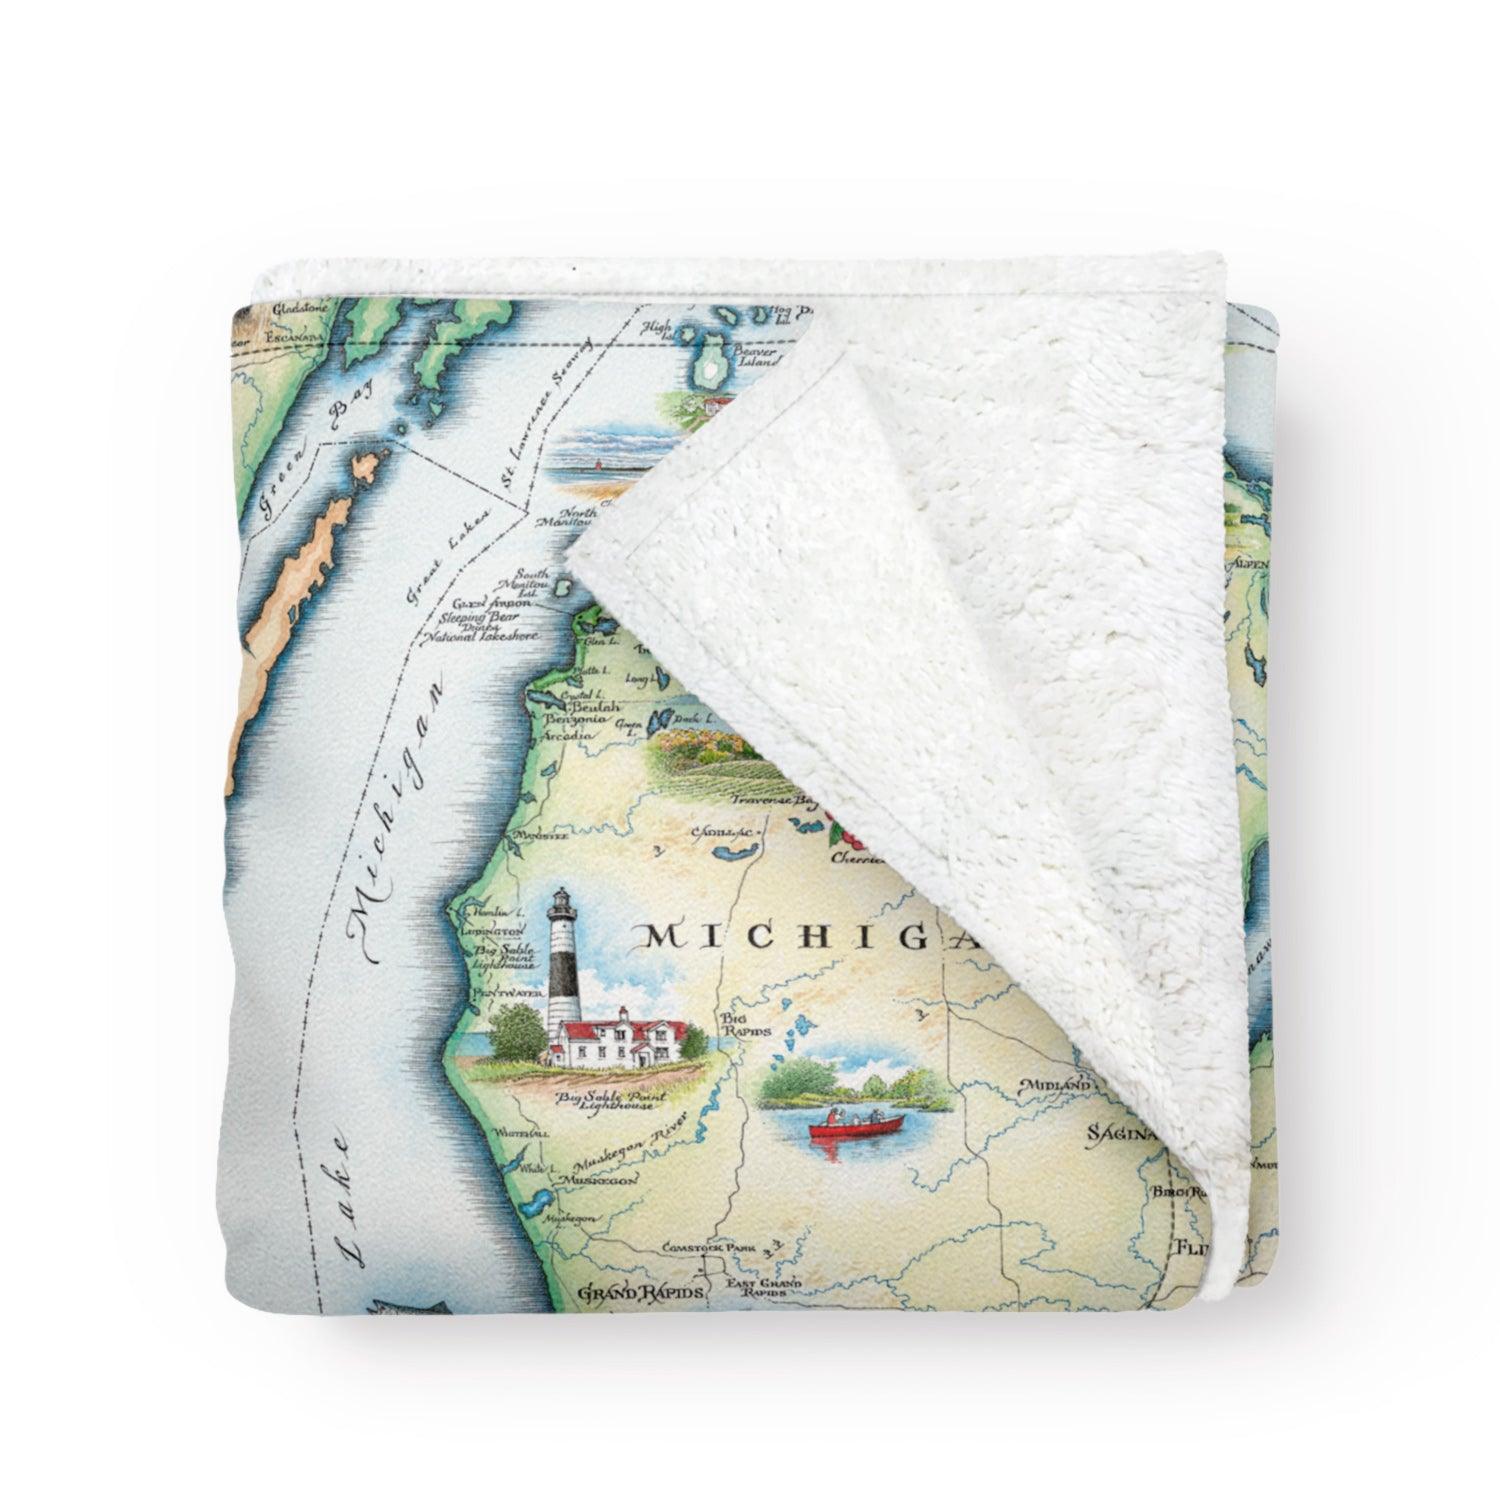 Folded blanket with a map of Michigan on it. Soft and cozy fleece blanket. Artistic map blanket. Measures 58